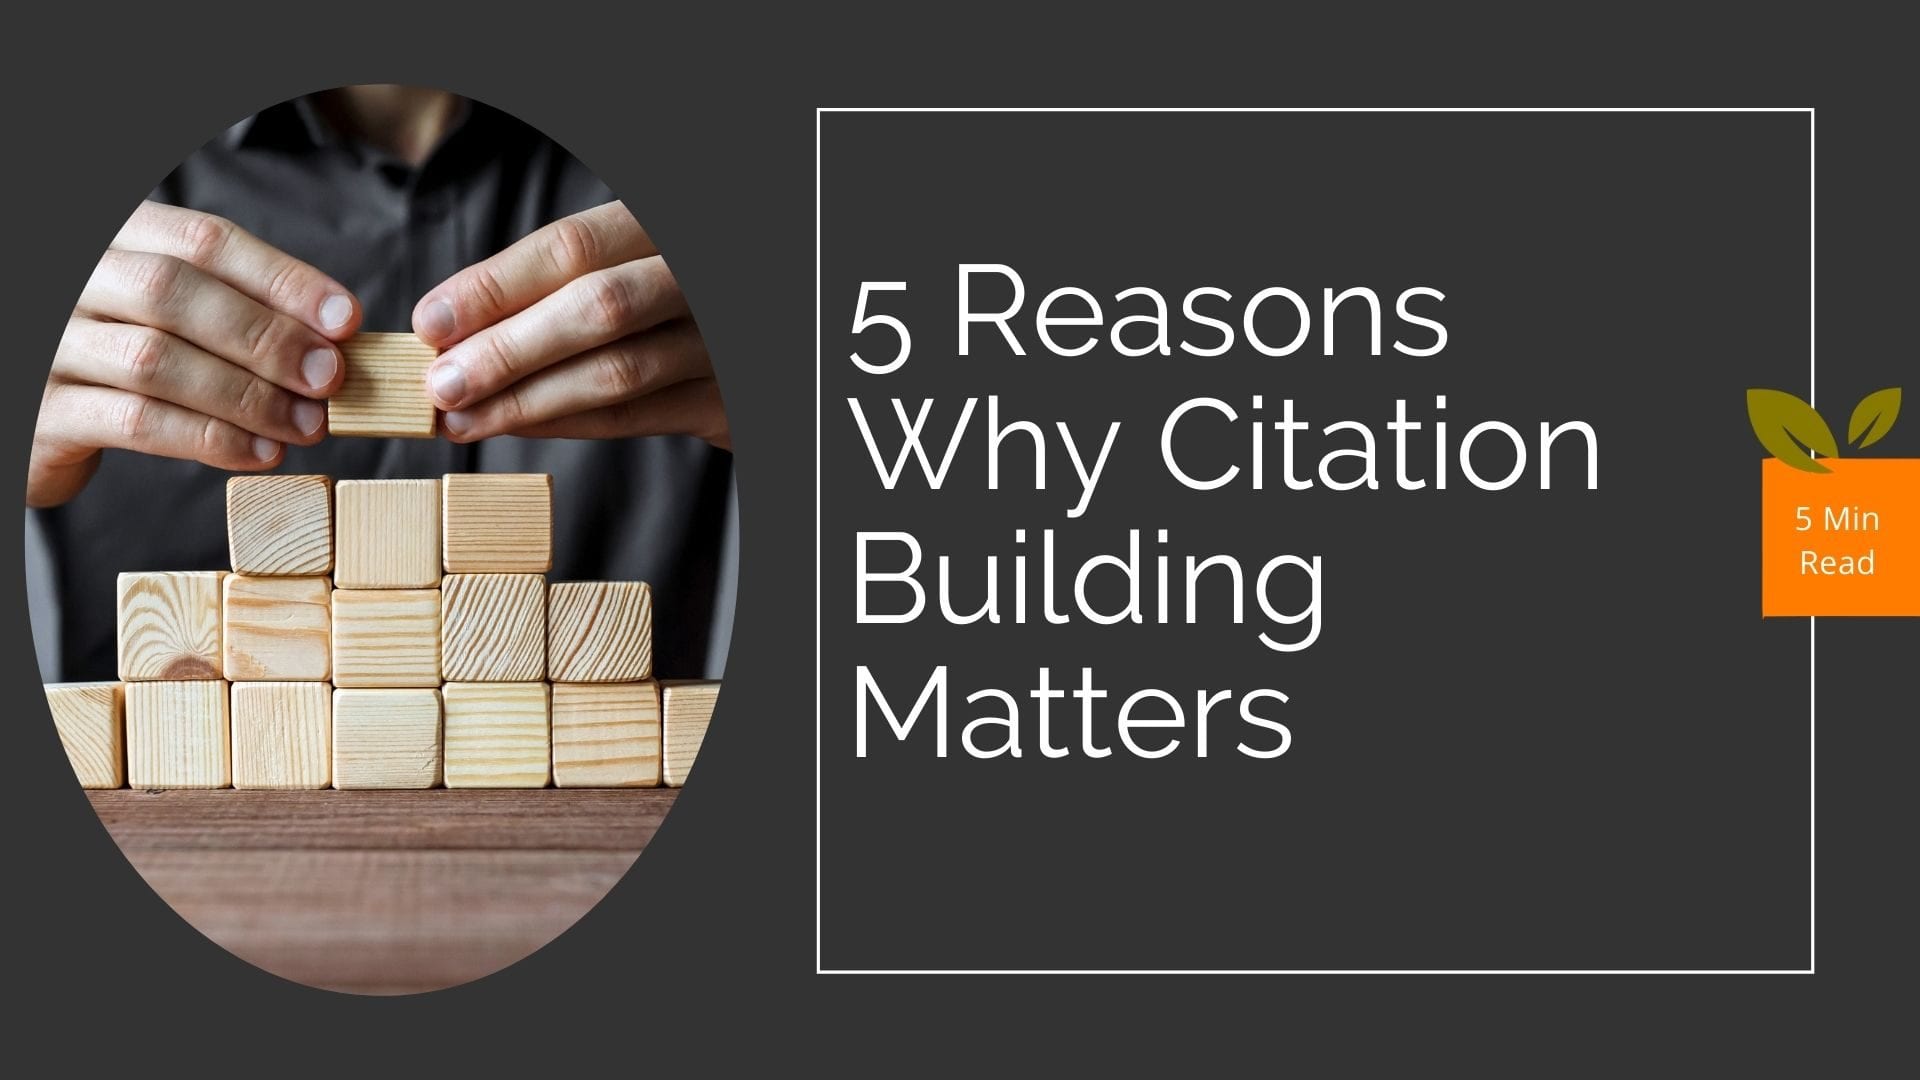 Why Citation Building Matters